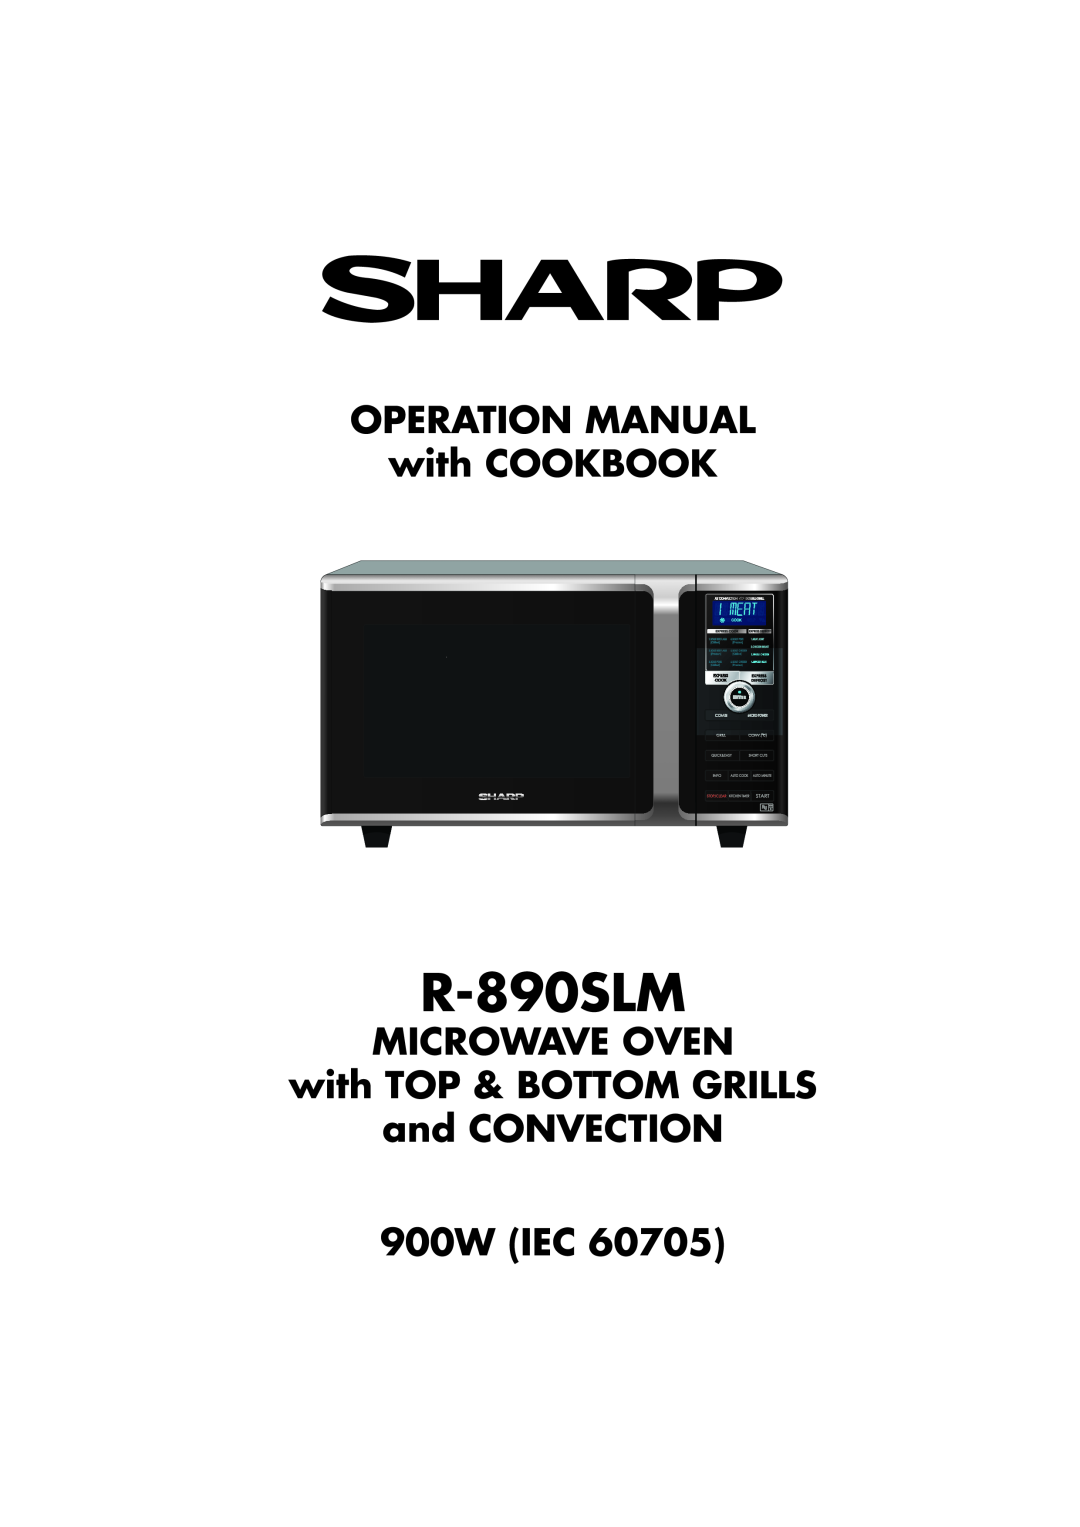 Sharp R-890SLM operation manual MICROWAVE OVEN with TOP & BOTTOM GRILLS and CONVECTION, 900W IEC 